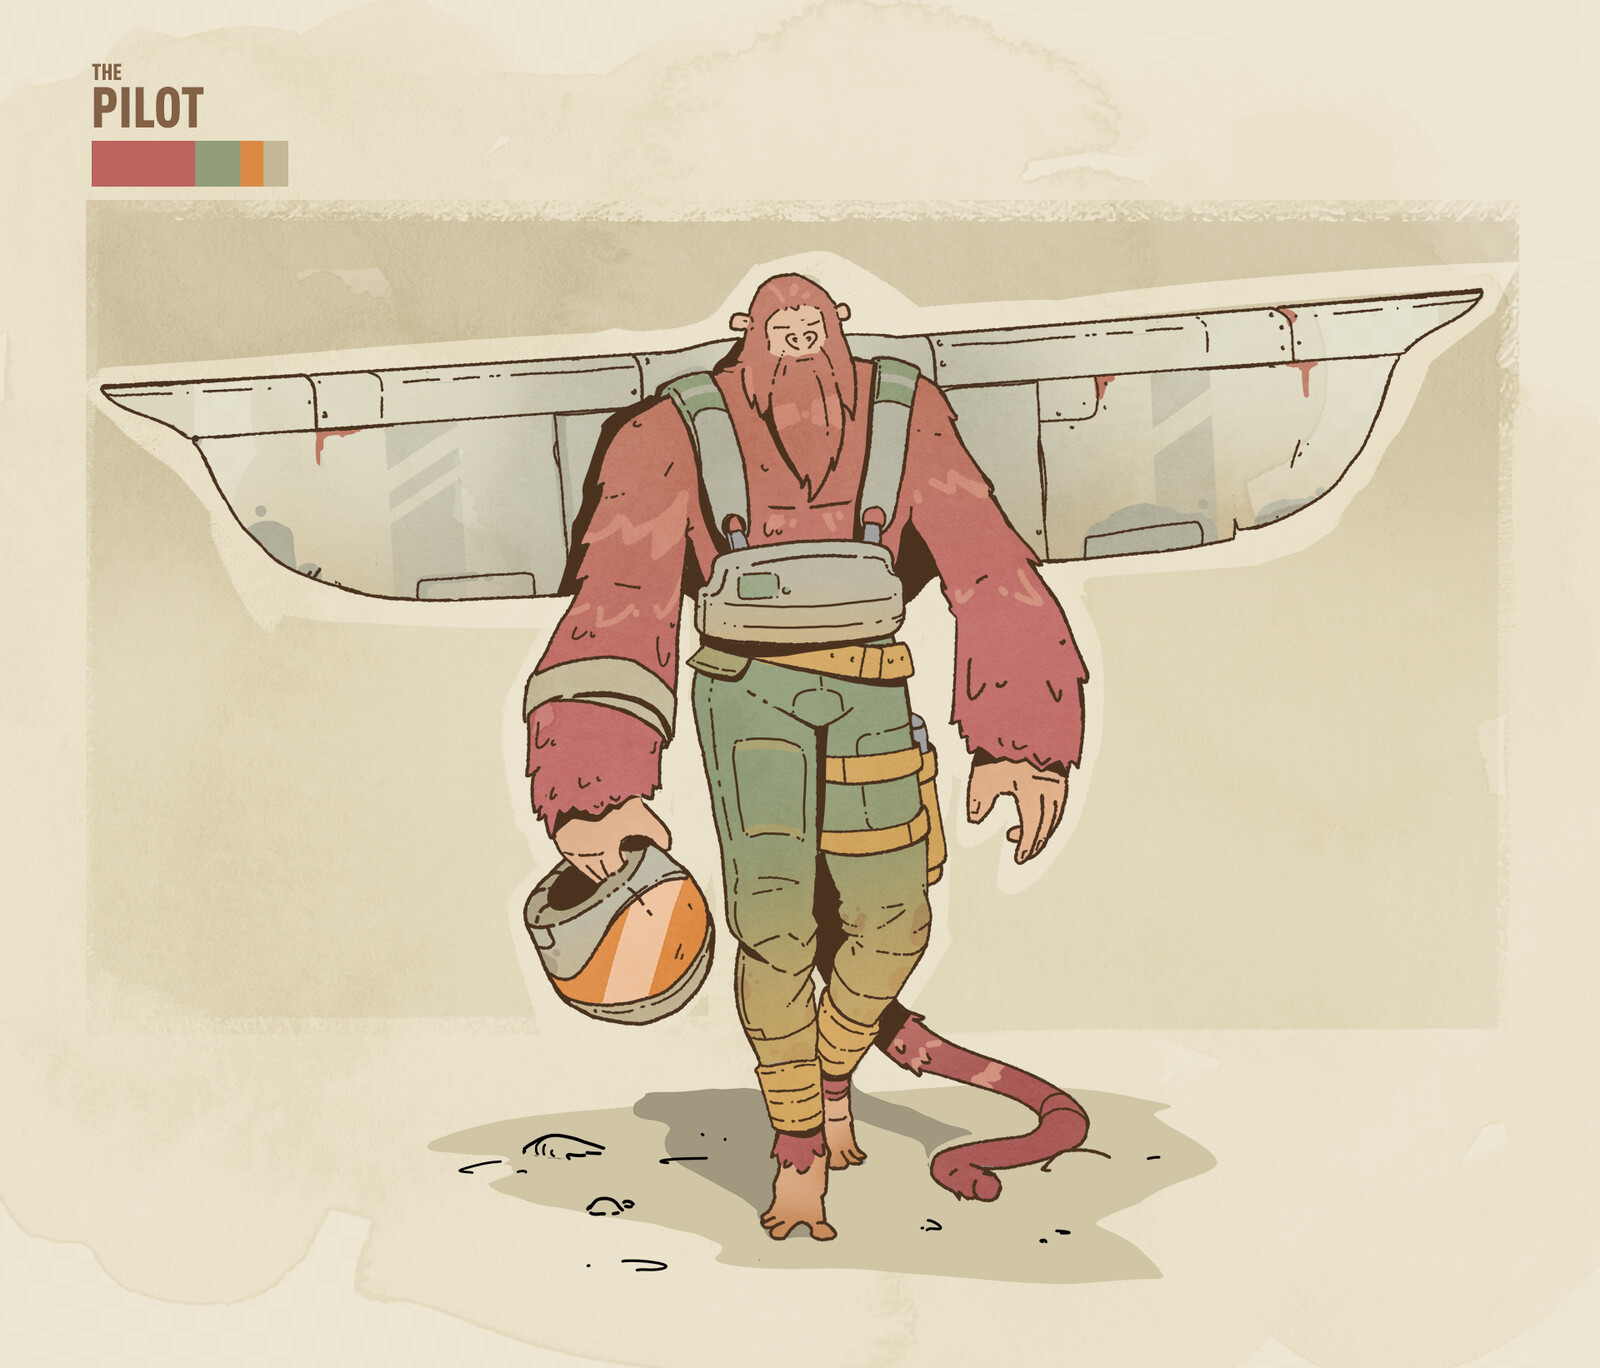 THE PILOT: scavenger of the land, he soars through the sky in search of relics.